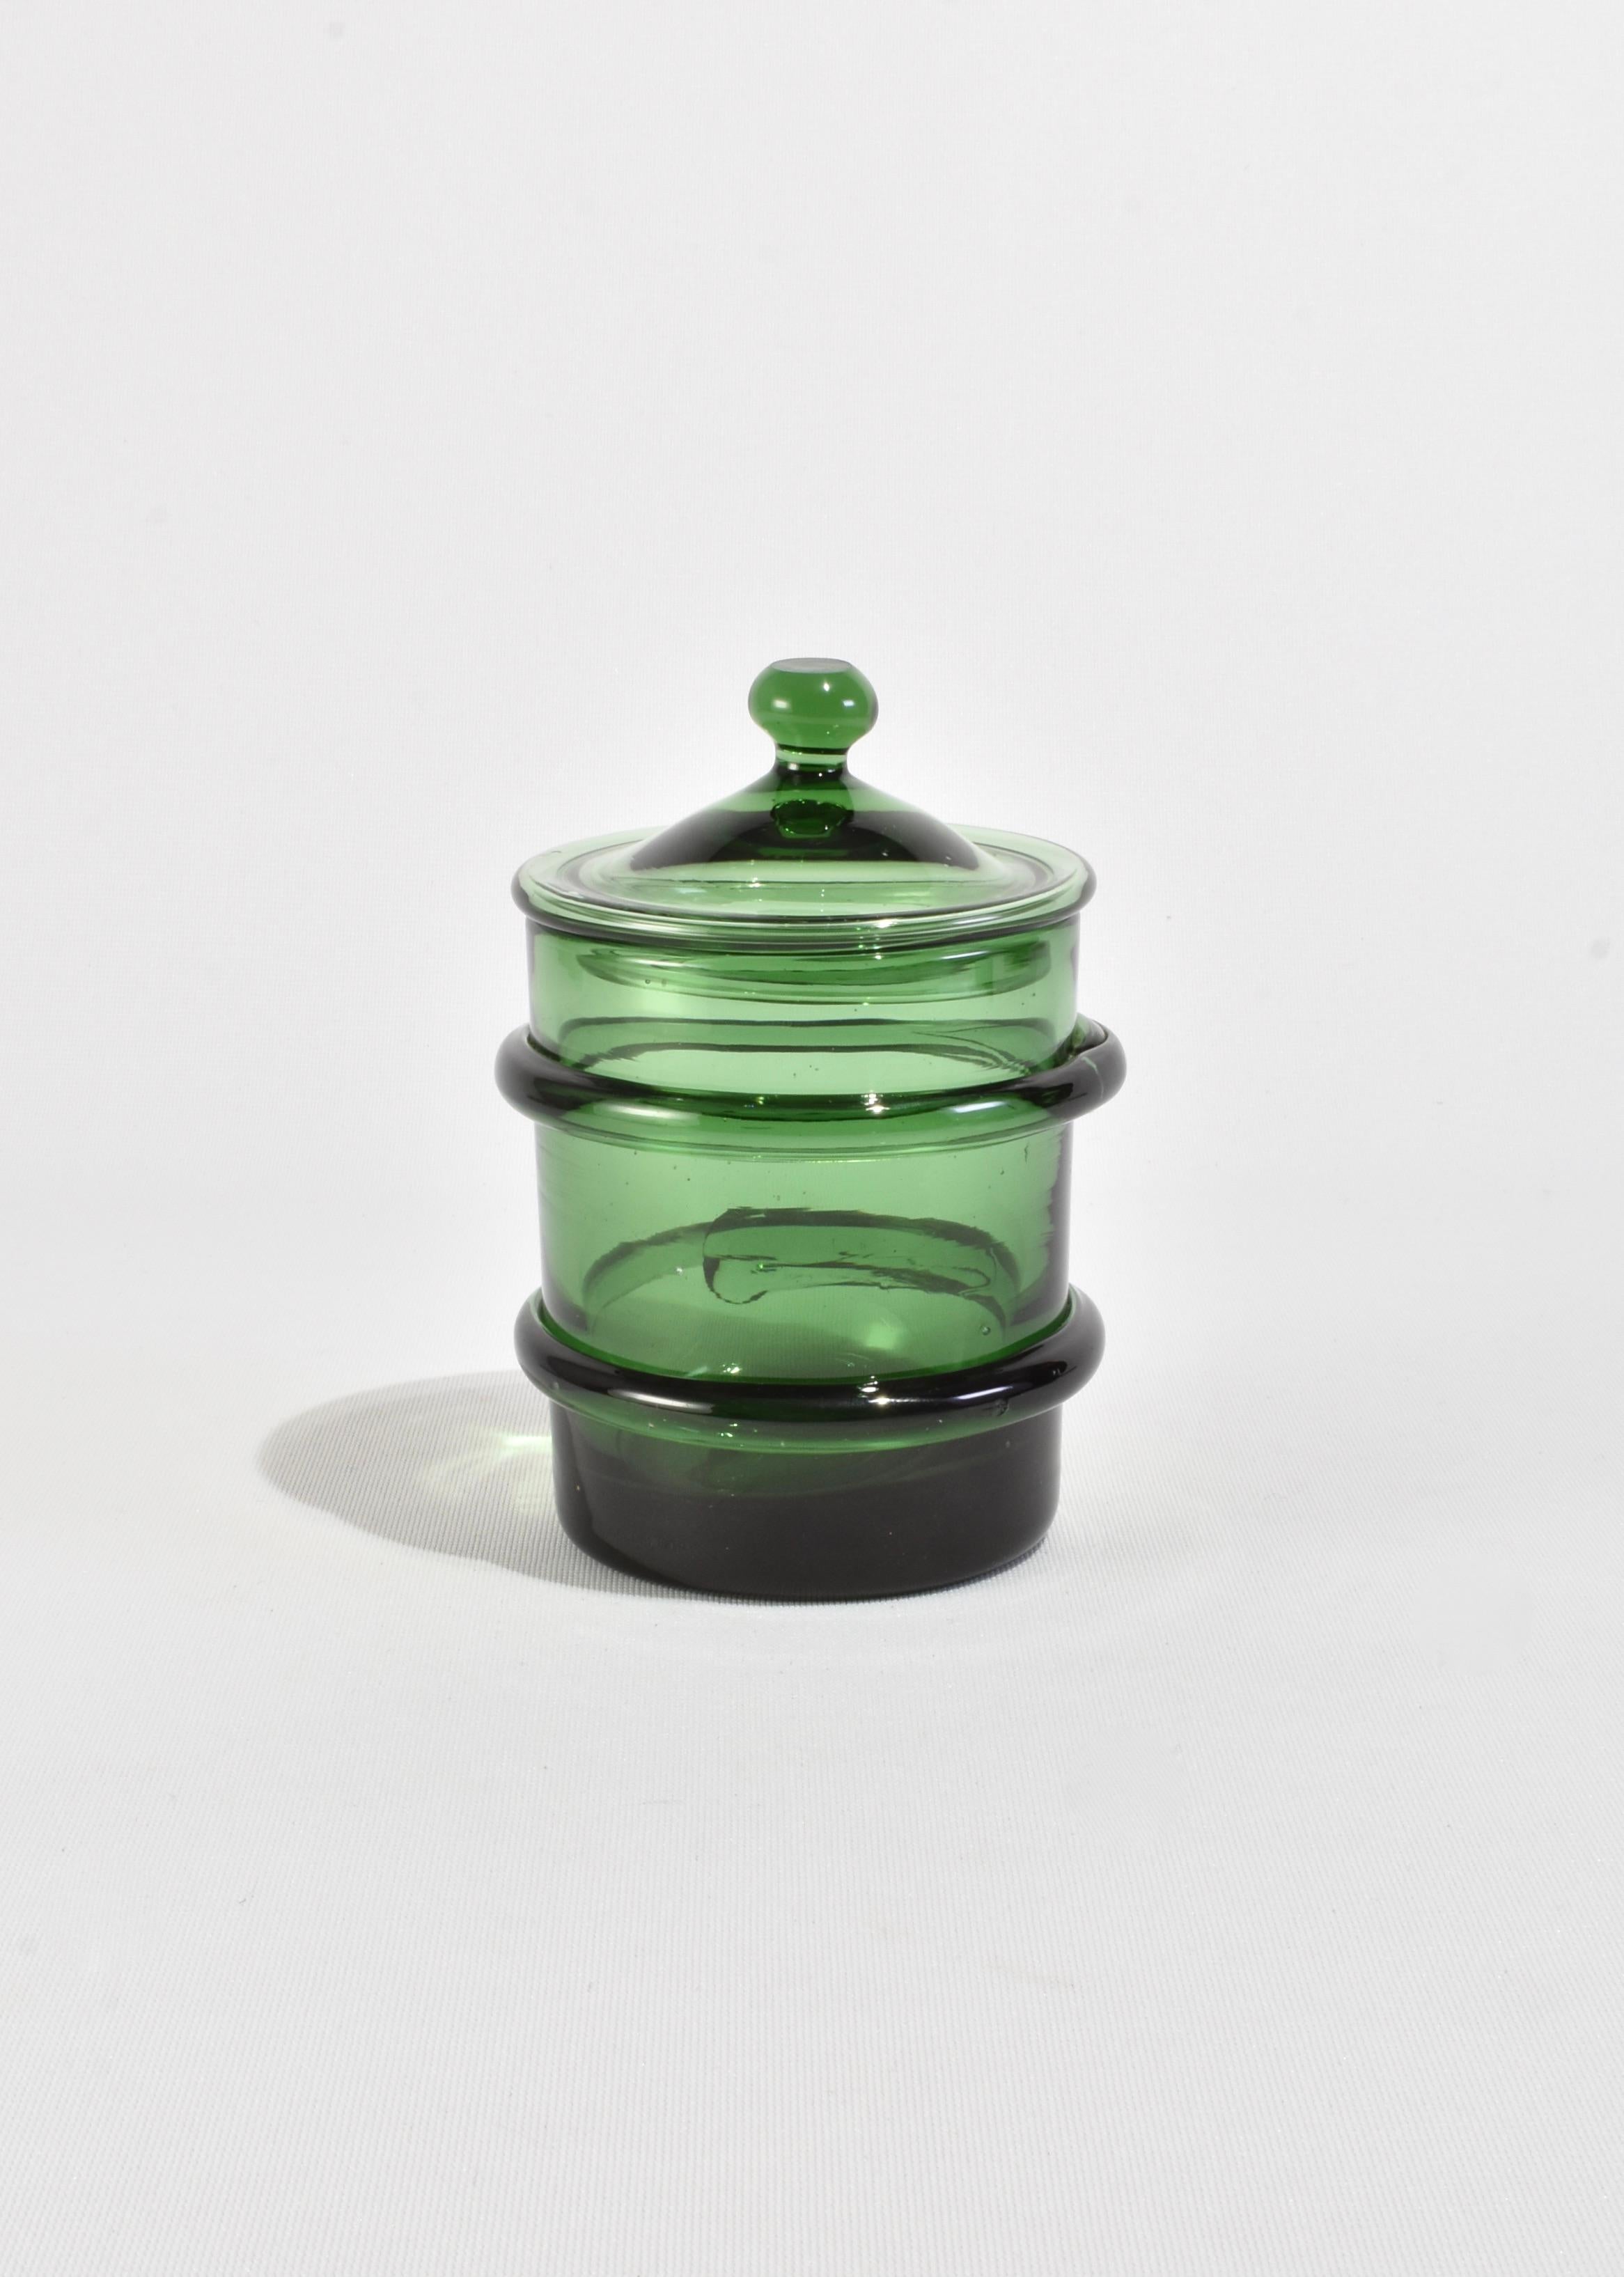 Hand-Crafted Green Apothecary Jar